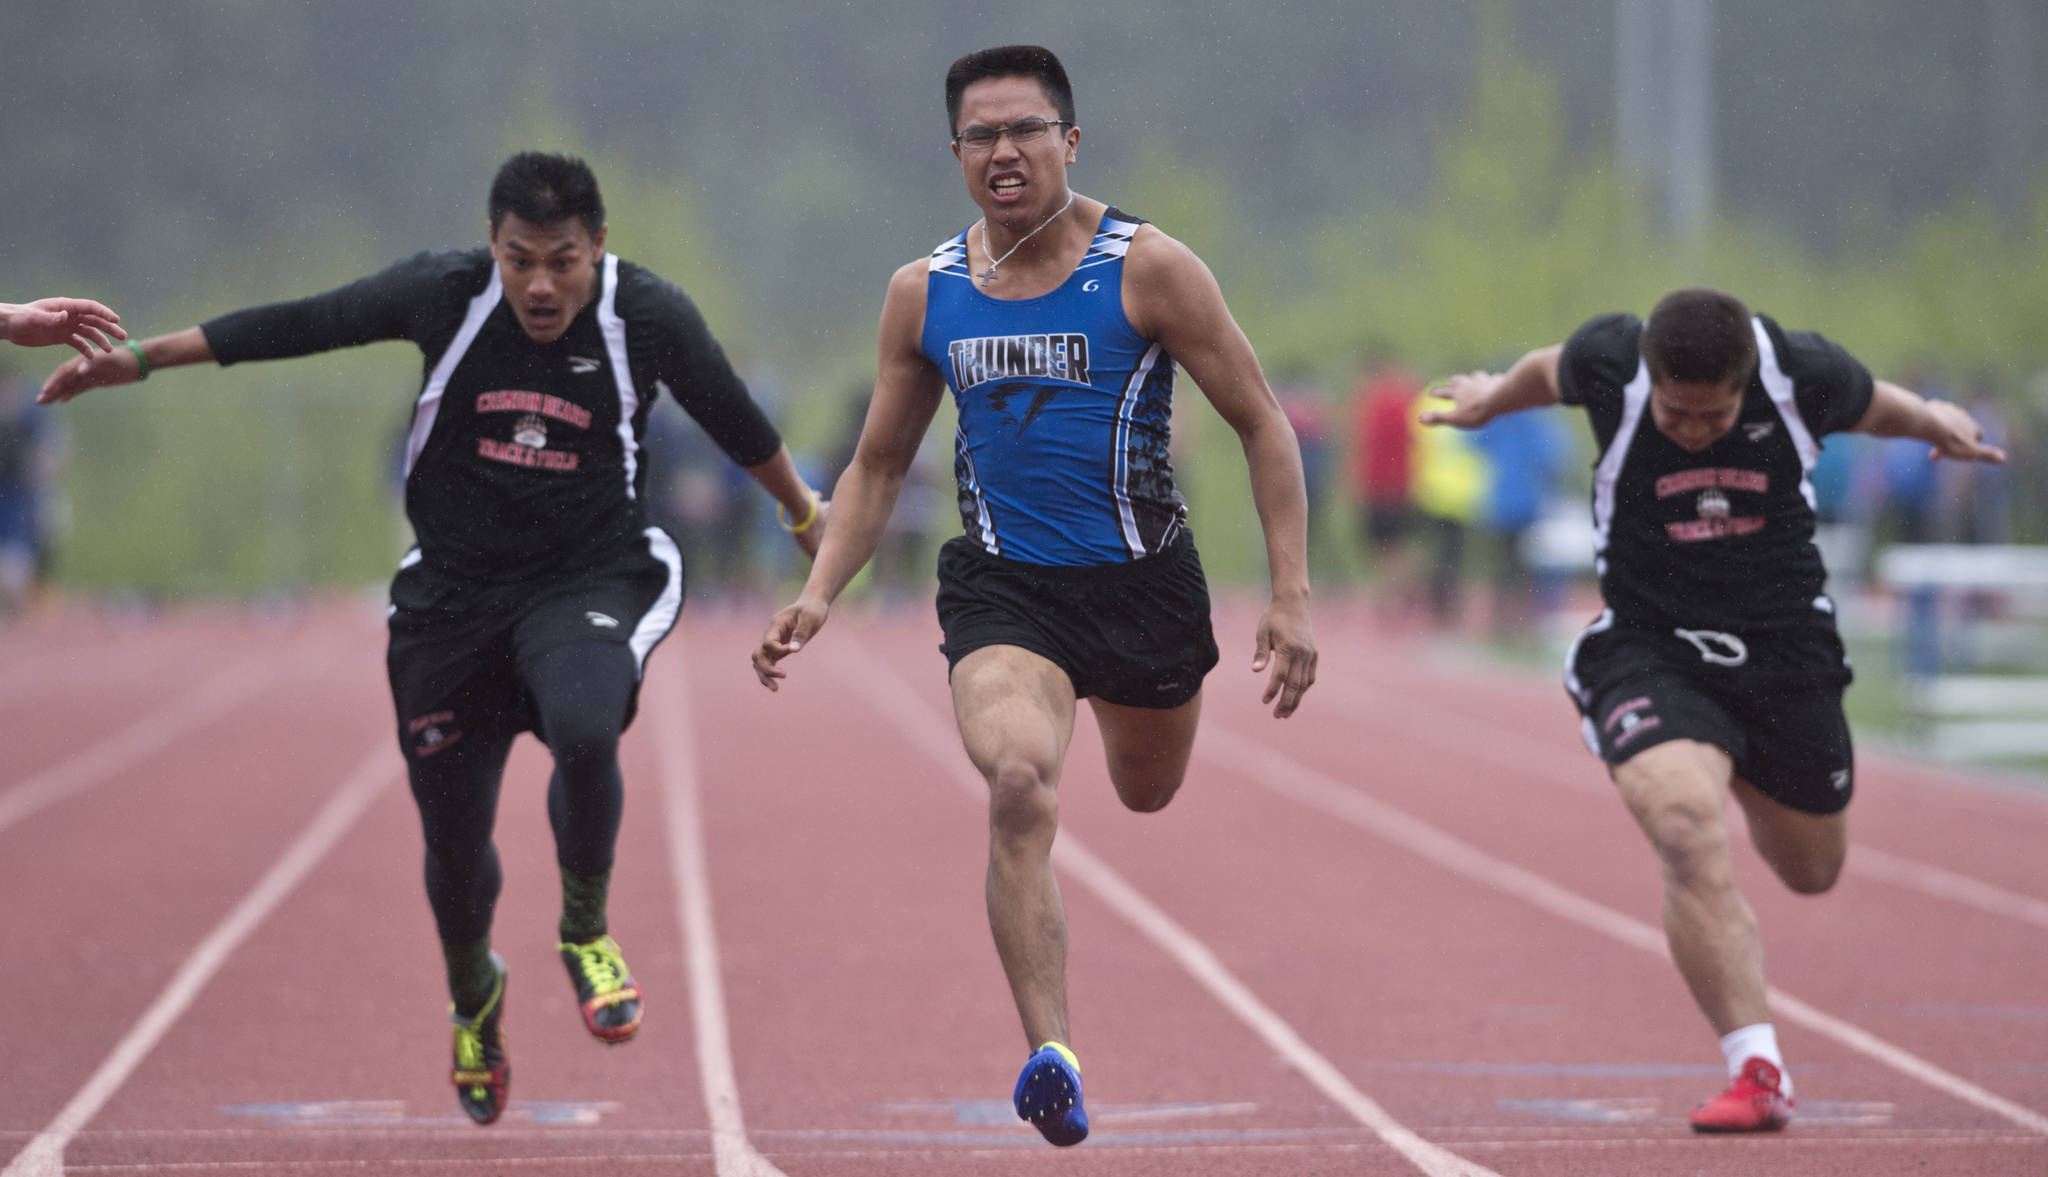 Thunder Mountain’s Erick Whisenant, center, pushes ahead of Juneau-Douglas’ Ulyx Bohulano, left, and Lance Fenumiai in a preliminary 100-meter dash at the Region V Track and Field meet at Thunder Mountain High School on May 19, 2017. (Michael Penn | Juneau Empire File)